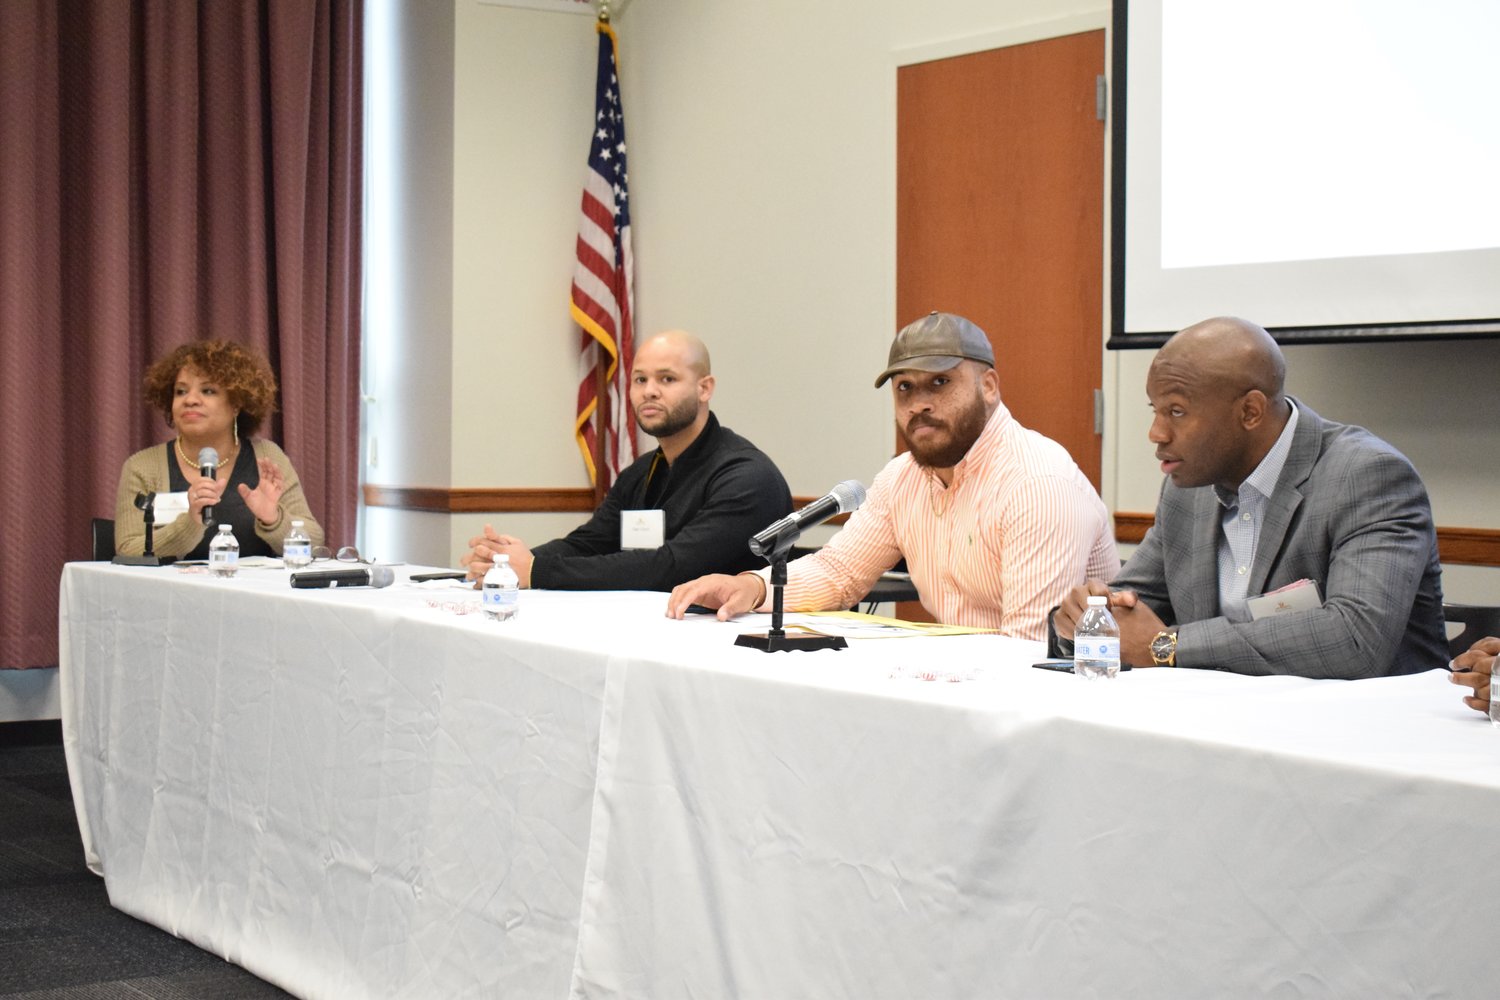 Mimi Pierre-Johnson, left, led a pannel of millennials who gave their perspectives on youth engagement. From the left were Dan Lloyd, Pastor Justin Greaves and Leonard lans.